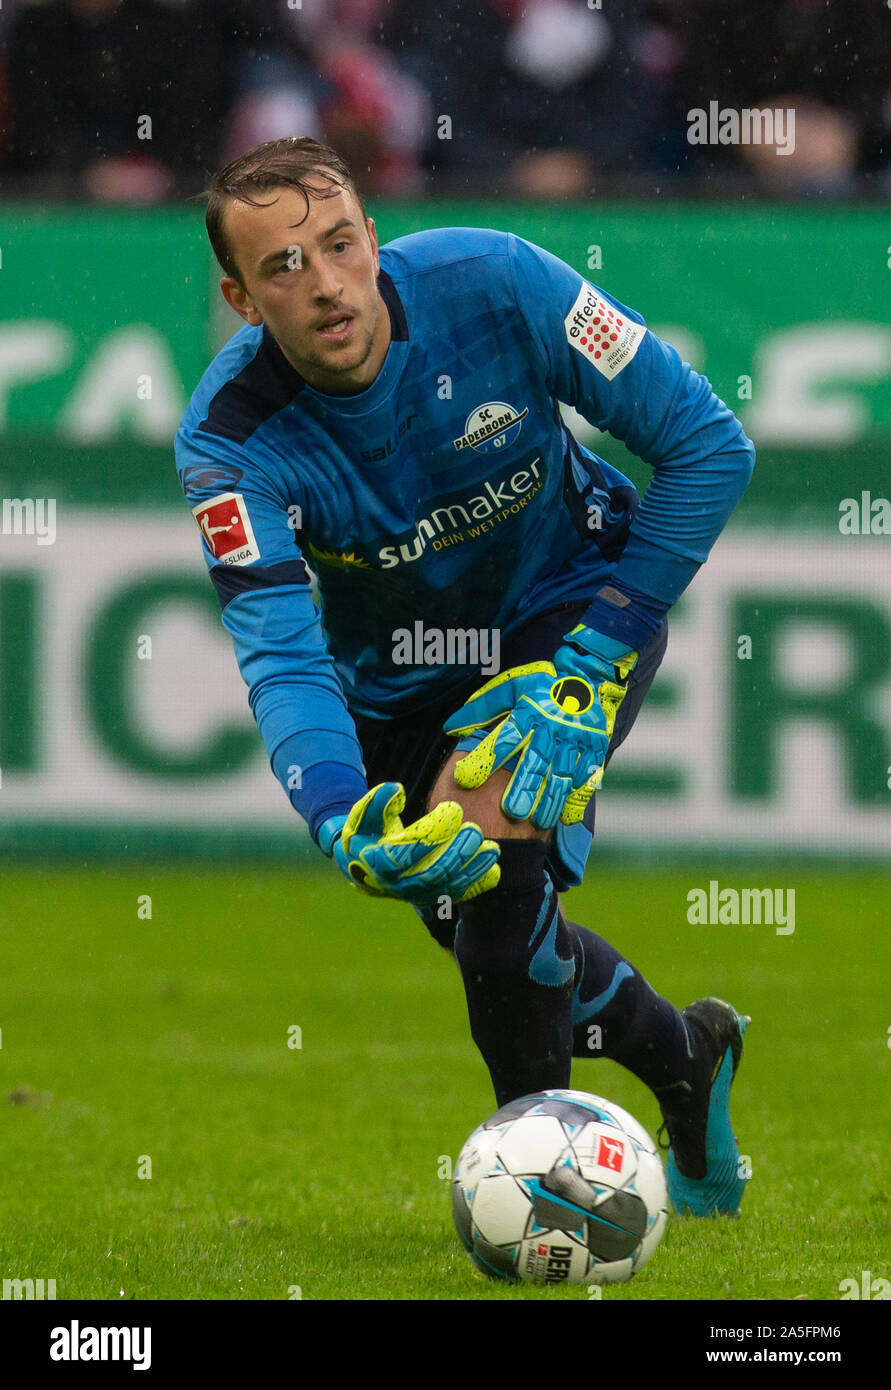 Cologne, Germany, 20.10.2019, Bundesliga matchday 8, 1. FC Koeln - SC Paderborn: Goalkeeper Leopold Zingerle (Paderborn) throws the ball. DFL REGULATIONS PROHIBIT ANY USE OF PHOTOGRAPHS AS IMAGE SEQUENCES AND/OR QUASI-VIDEO             Credit: Juergen Schwarz/Alamy Live News Stock Photo